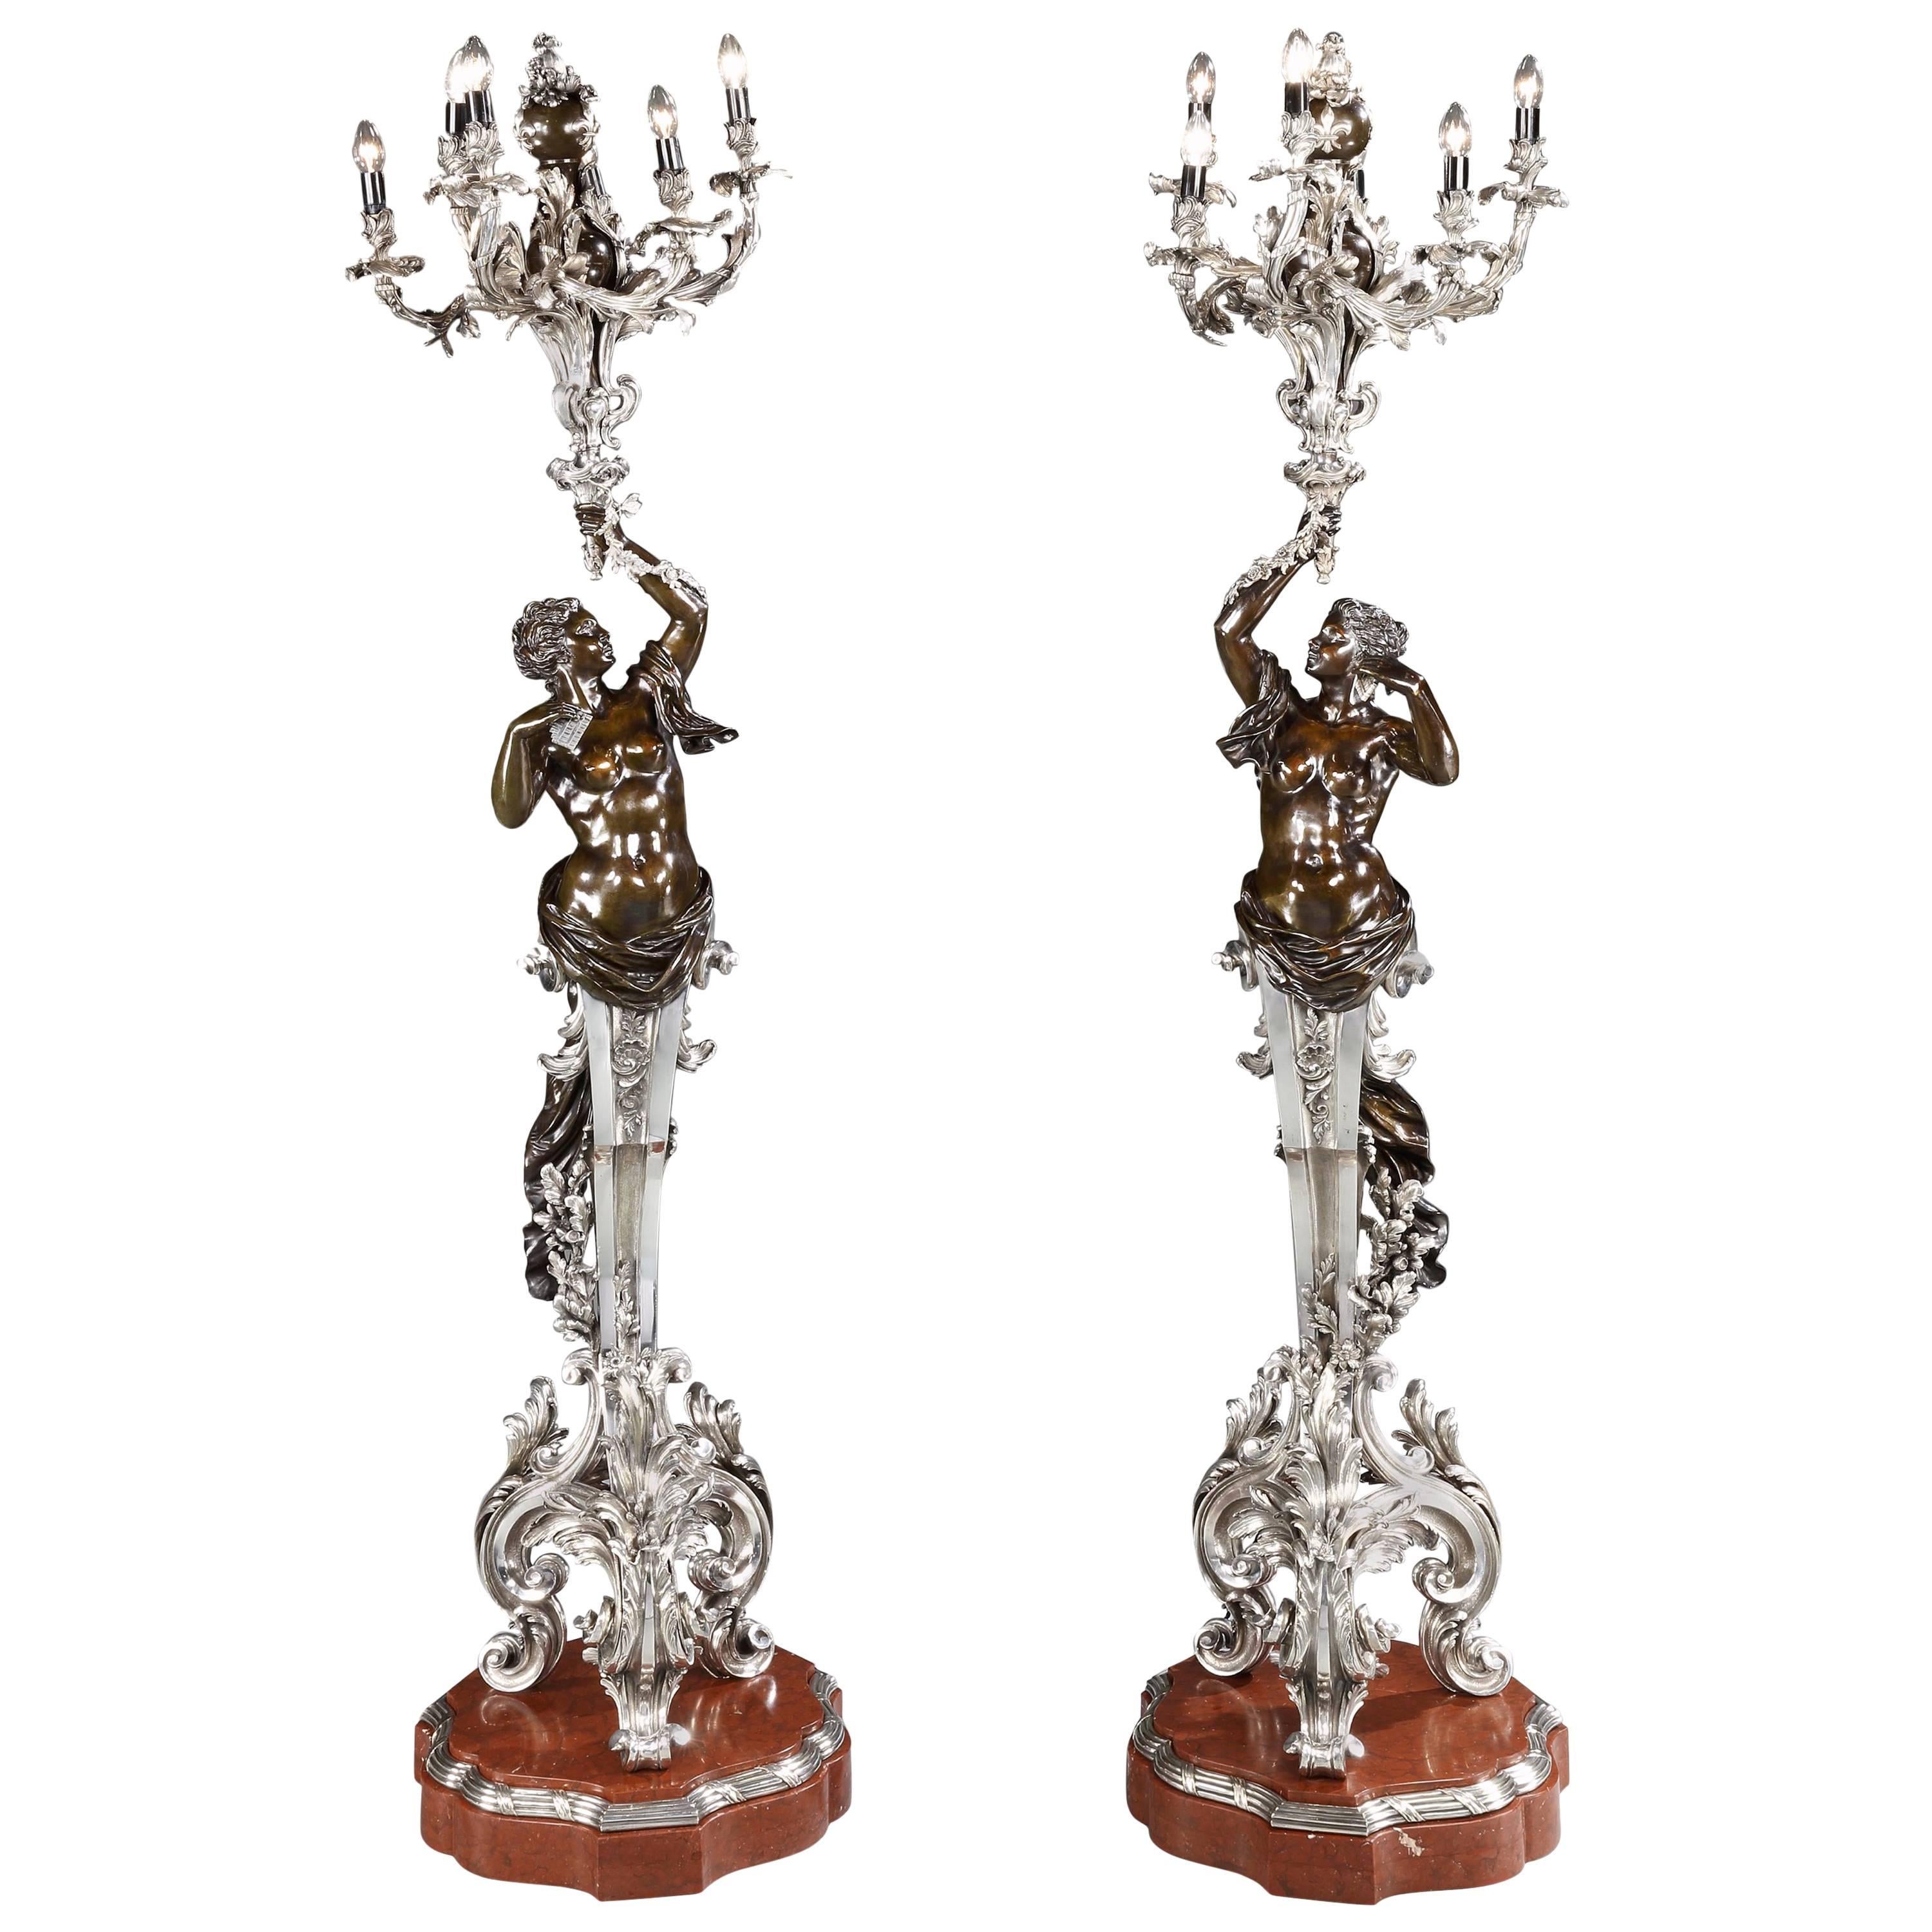 Pair of 19th Century French Patinated and Silvered Bronze Torchères Floor Lamps 